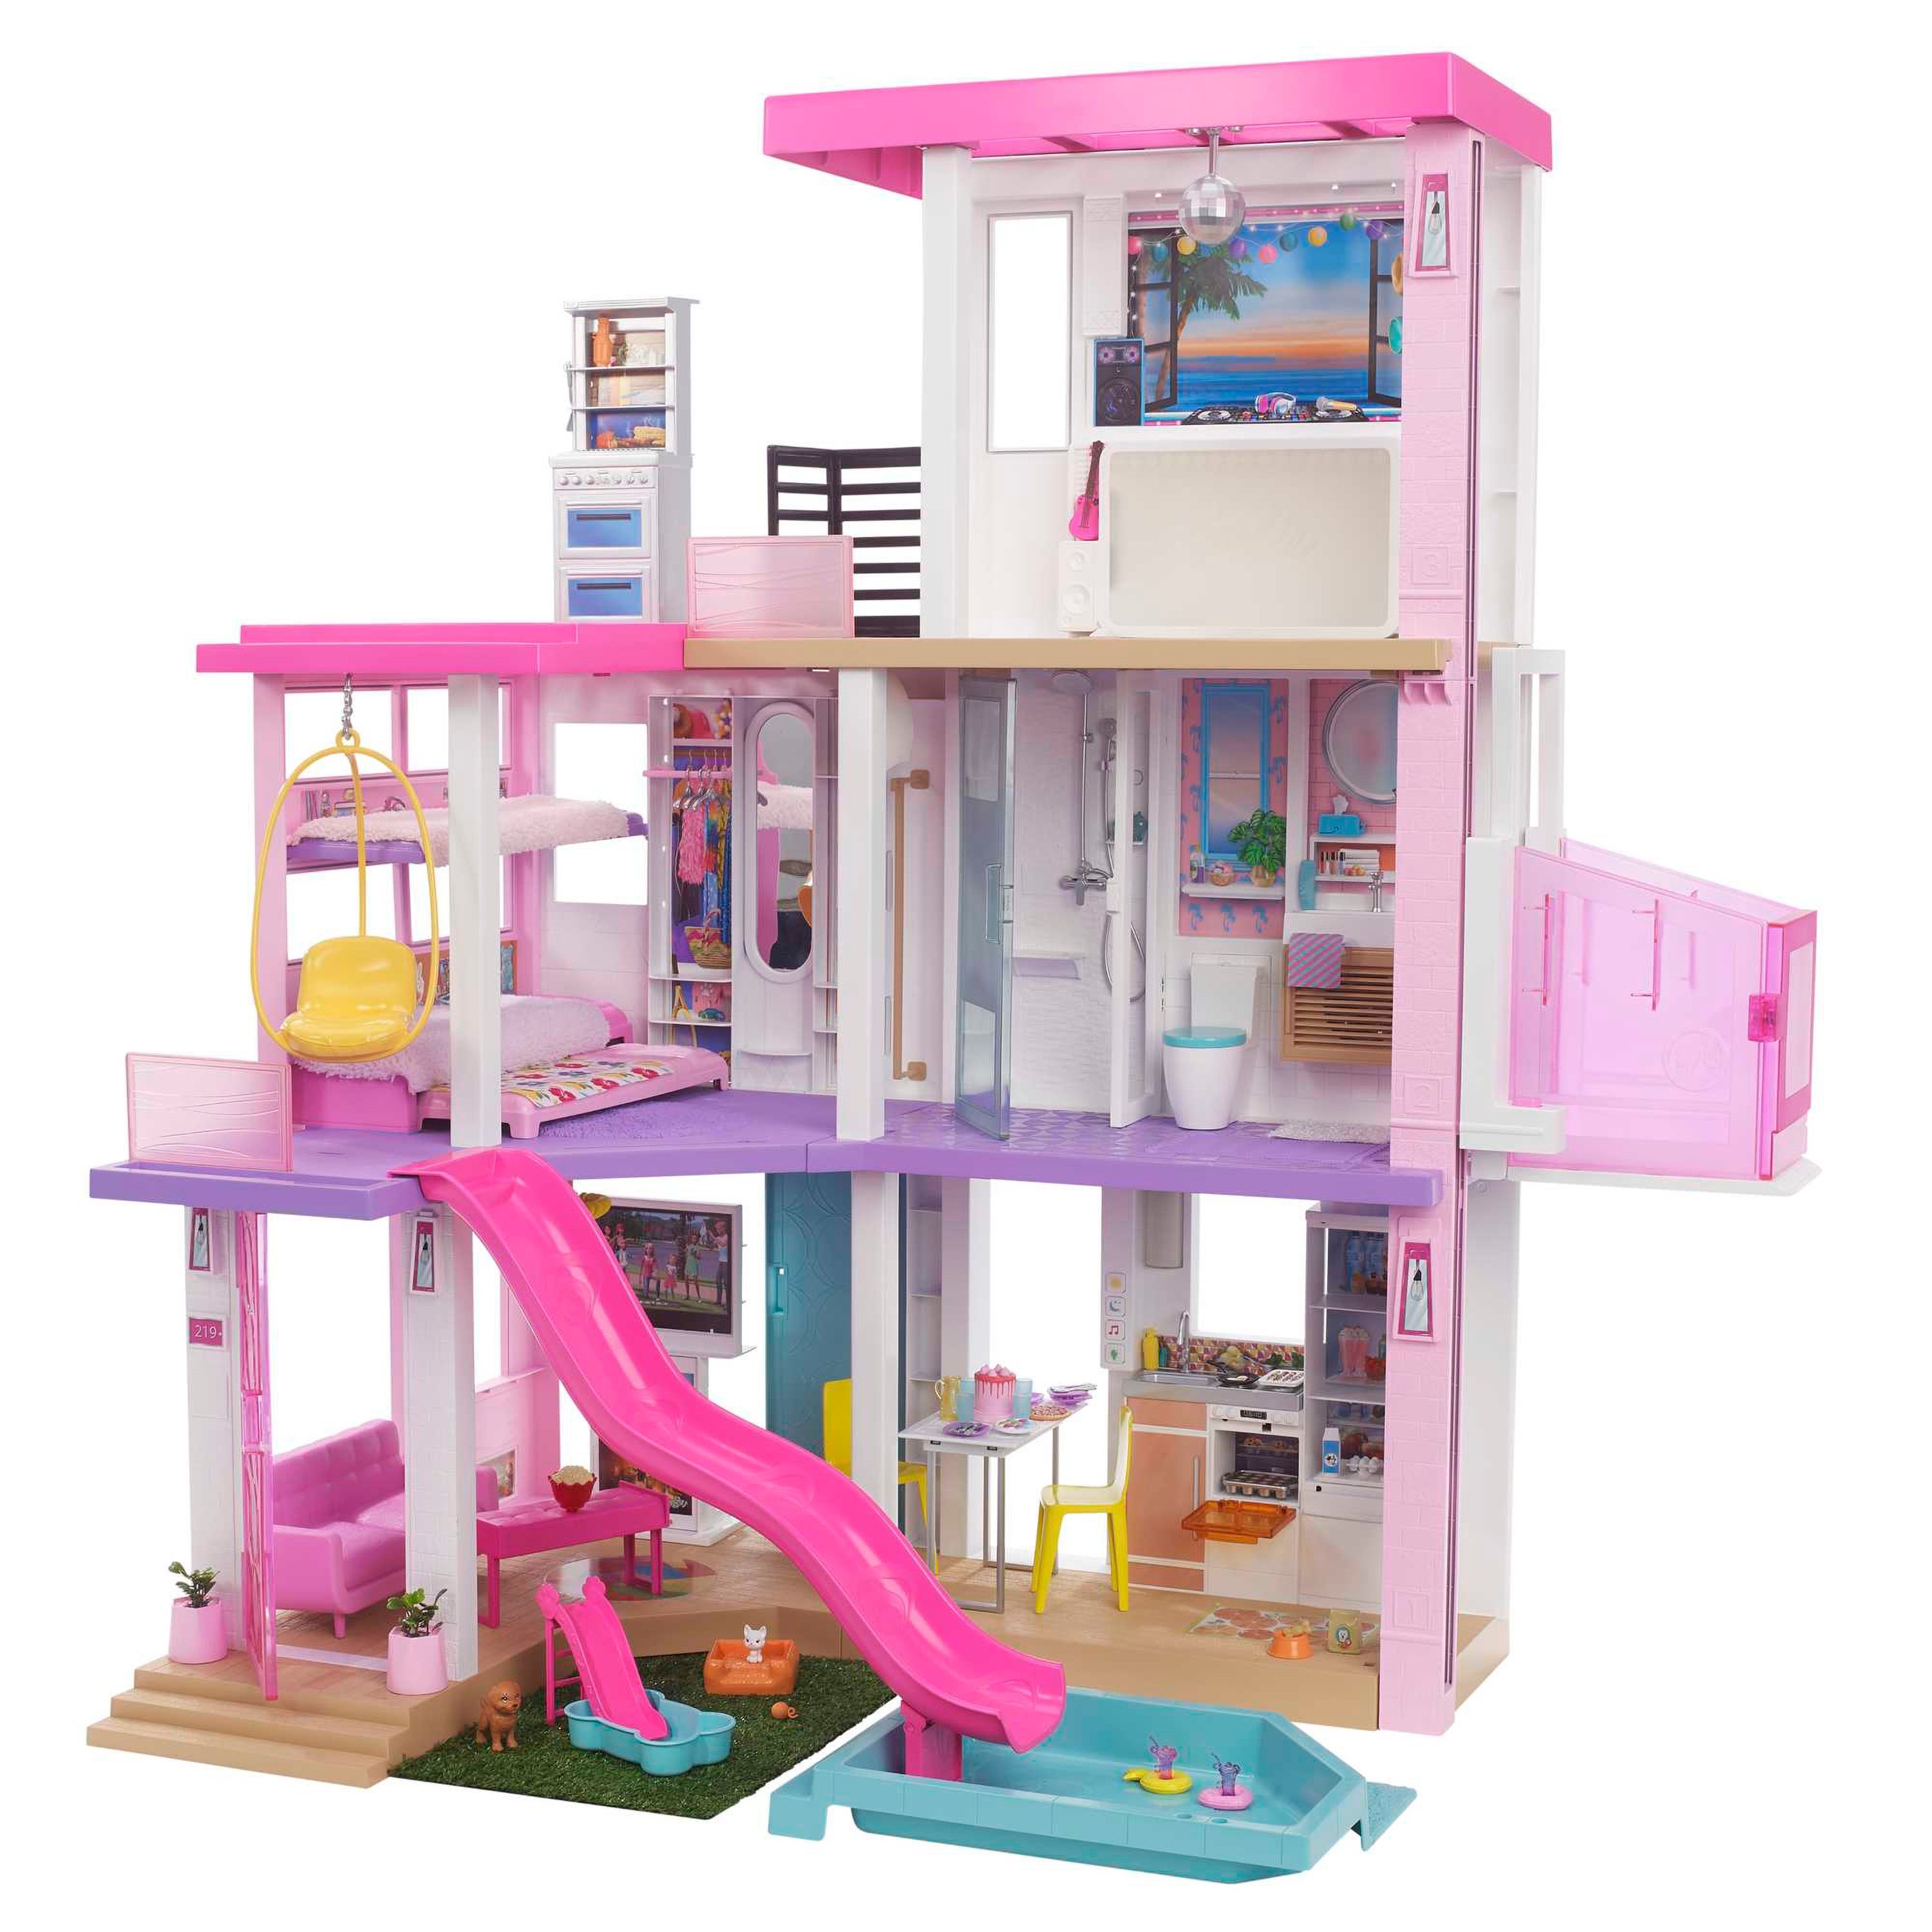 Barbie Dreamhouse Playset Ages 3+ Years